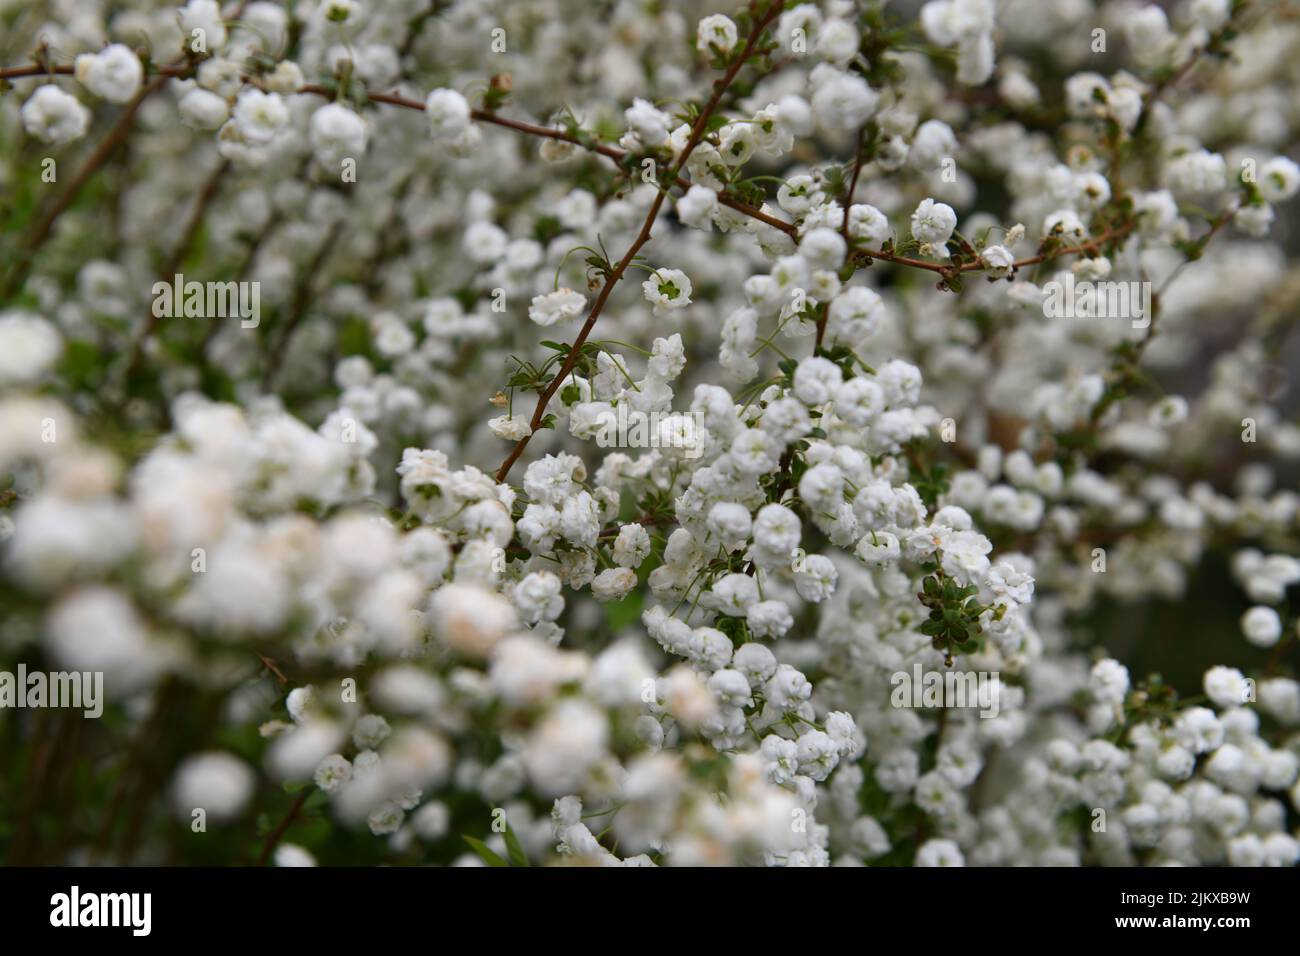 A closeup shot of beautiful white Spirea flower blossom on a tree in a green garden Stock Photo